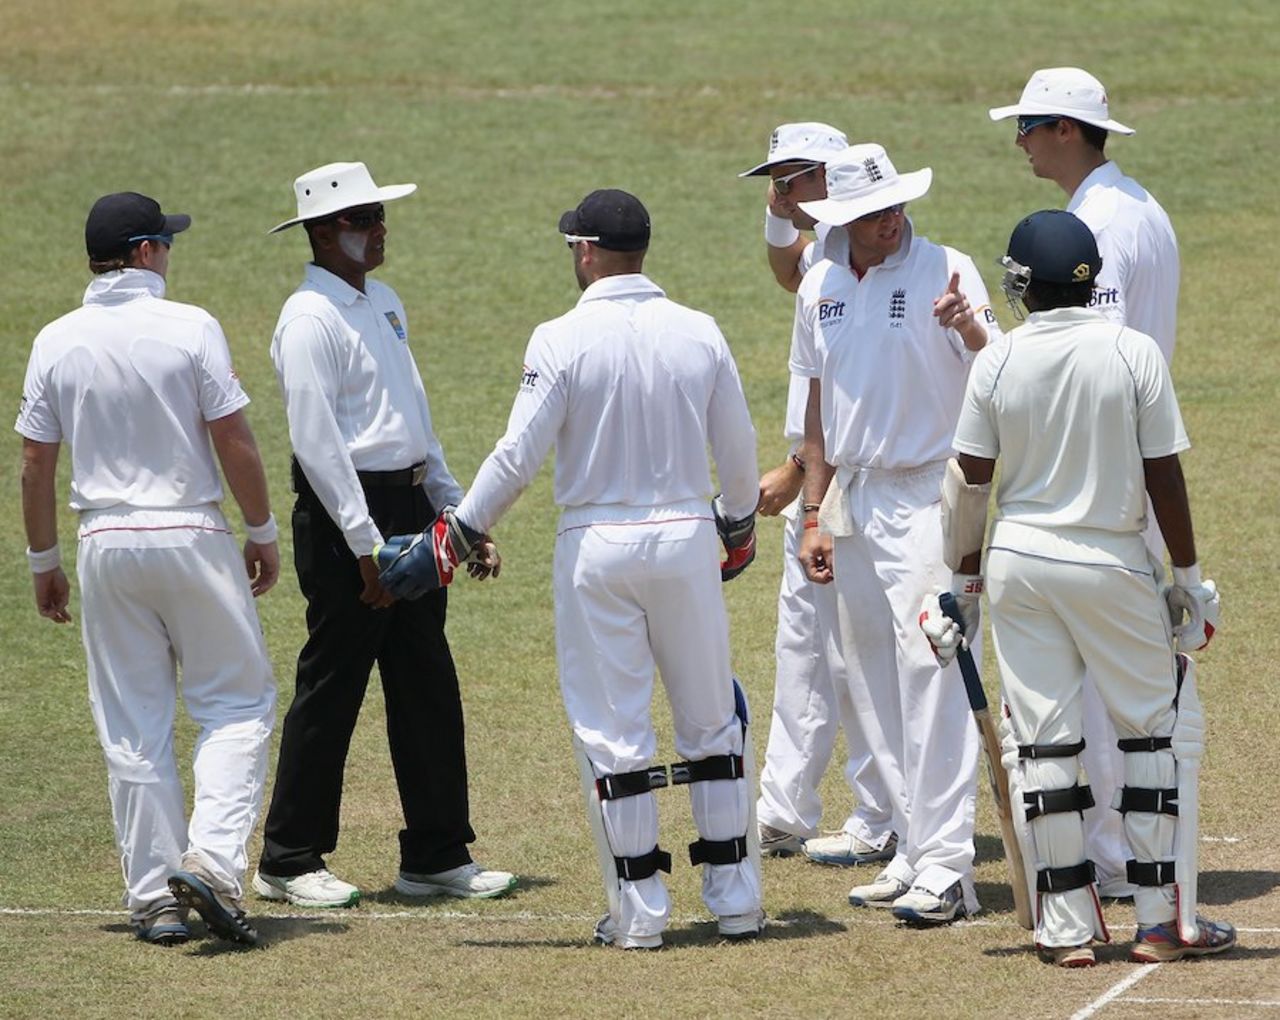 Graeme Swann exchanges words with Dilruwan Perera over a disputed catch, Sri Lanka Board XI v England XI, tour match, Colombo, 3rd day, March 17, 2012